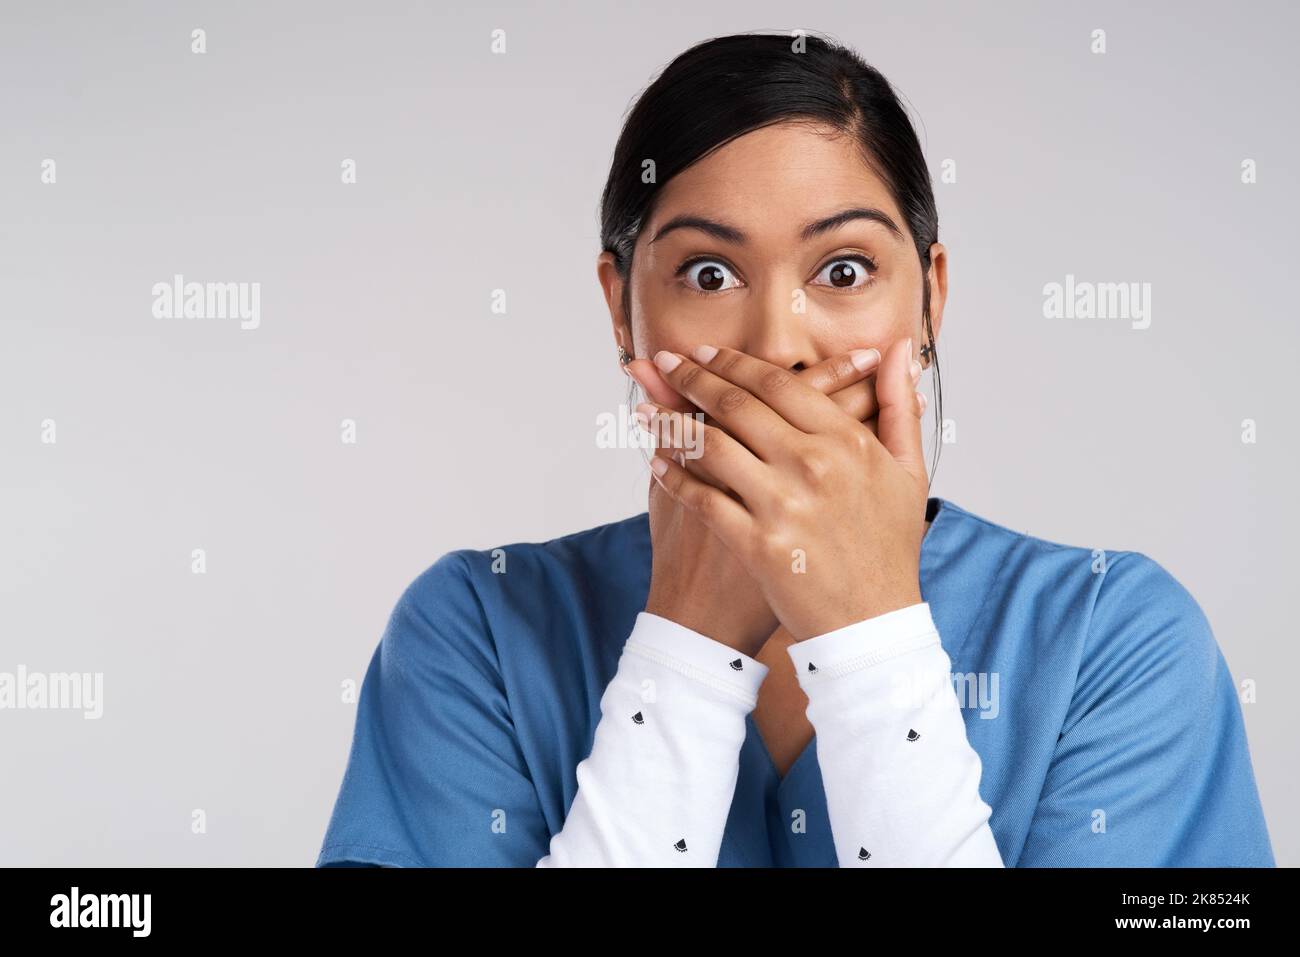 Sleep in makeshift tombs isnt peace, Im here, at least. Portrait of a shocked young doctor covering her mouth in scrubs against a white background. Stock Photo